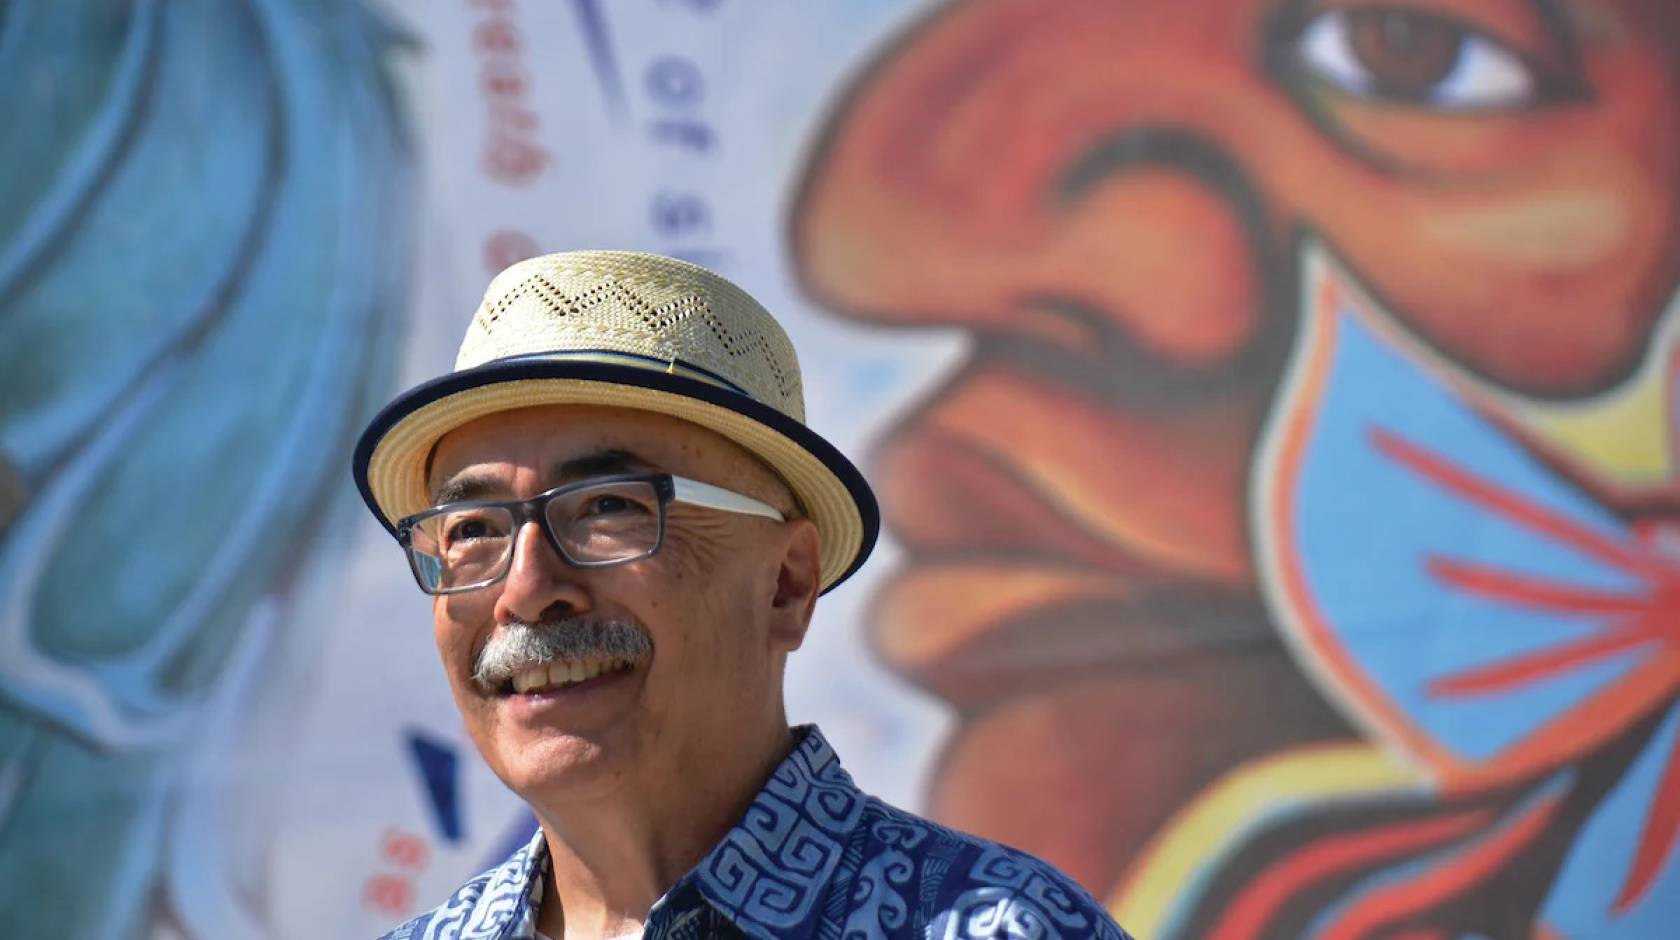 An older Latino man with a mustache, glasses and a jaunty hat in front of a colorful mural